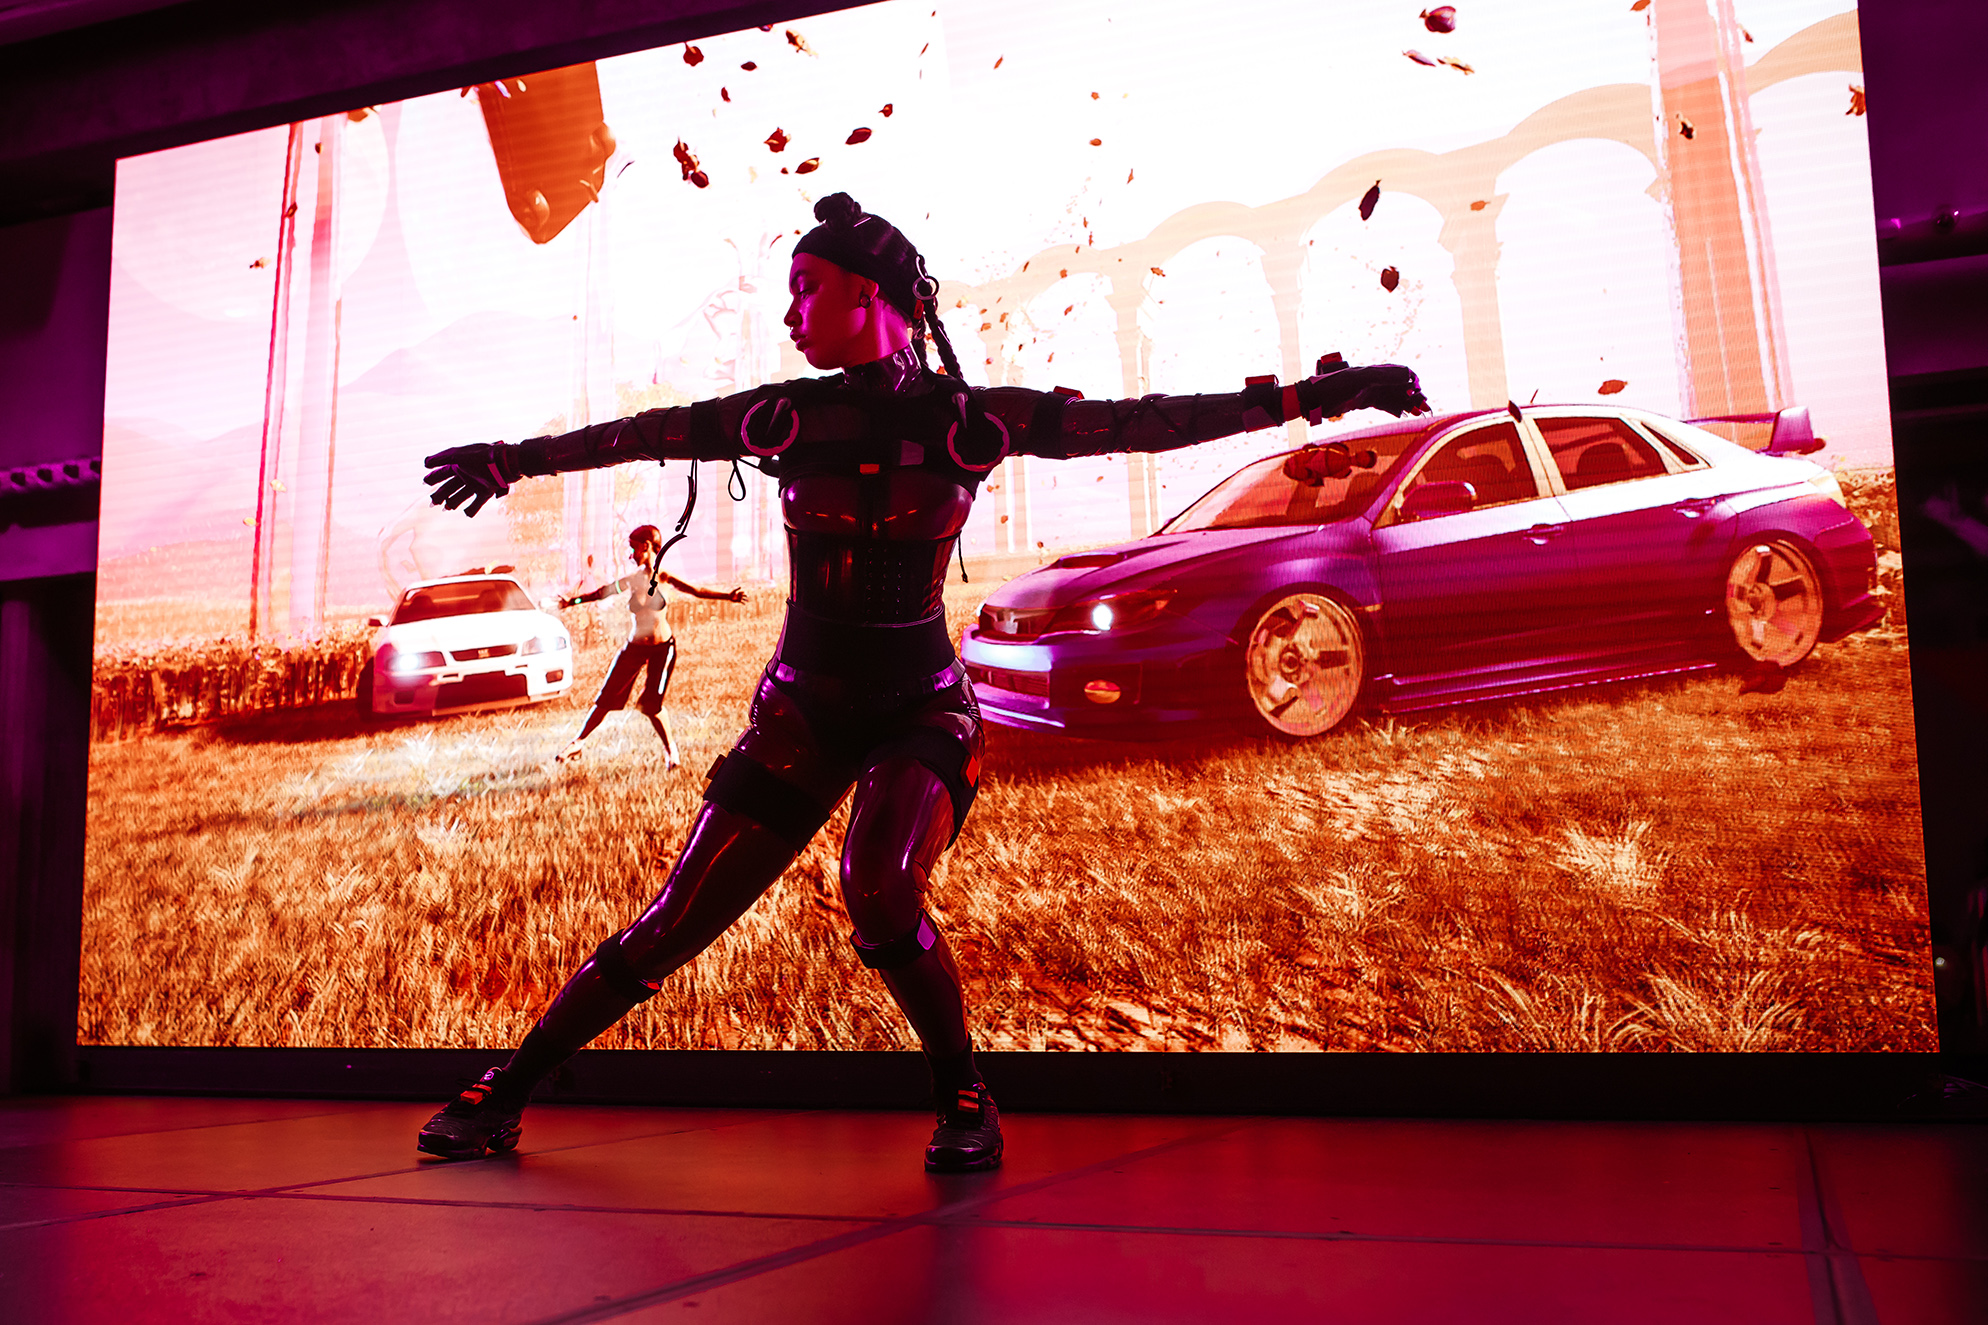 A performer on stage in front of a screen image of two cars in a field and a figure mimicking the movement of the performer